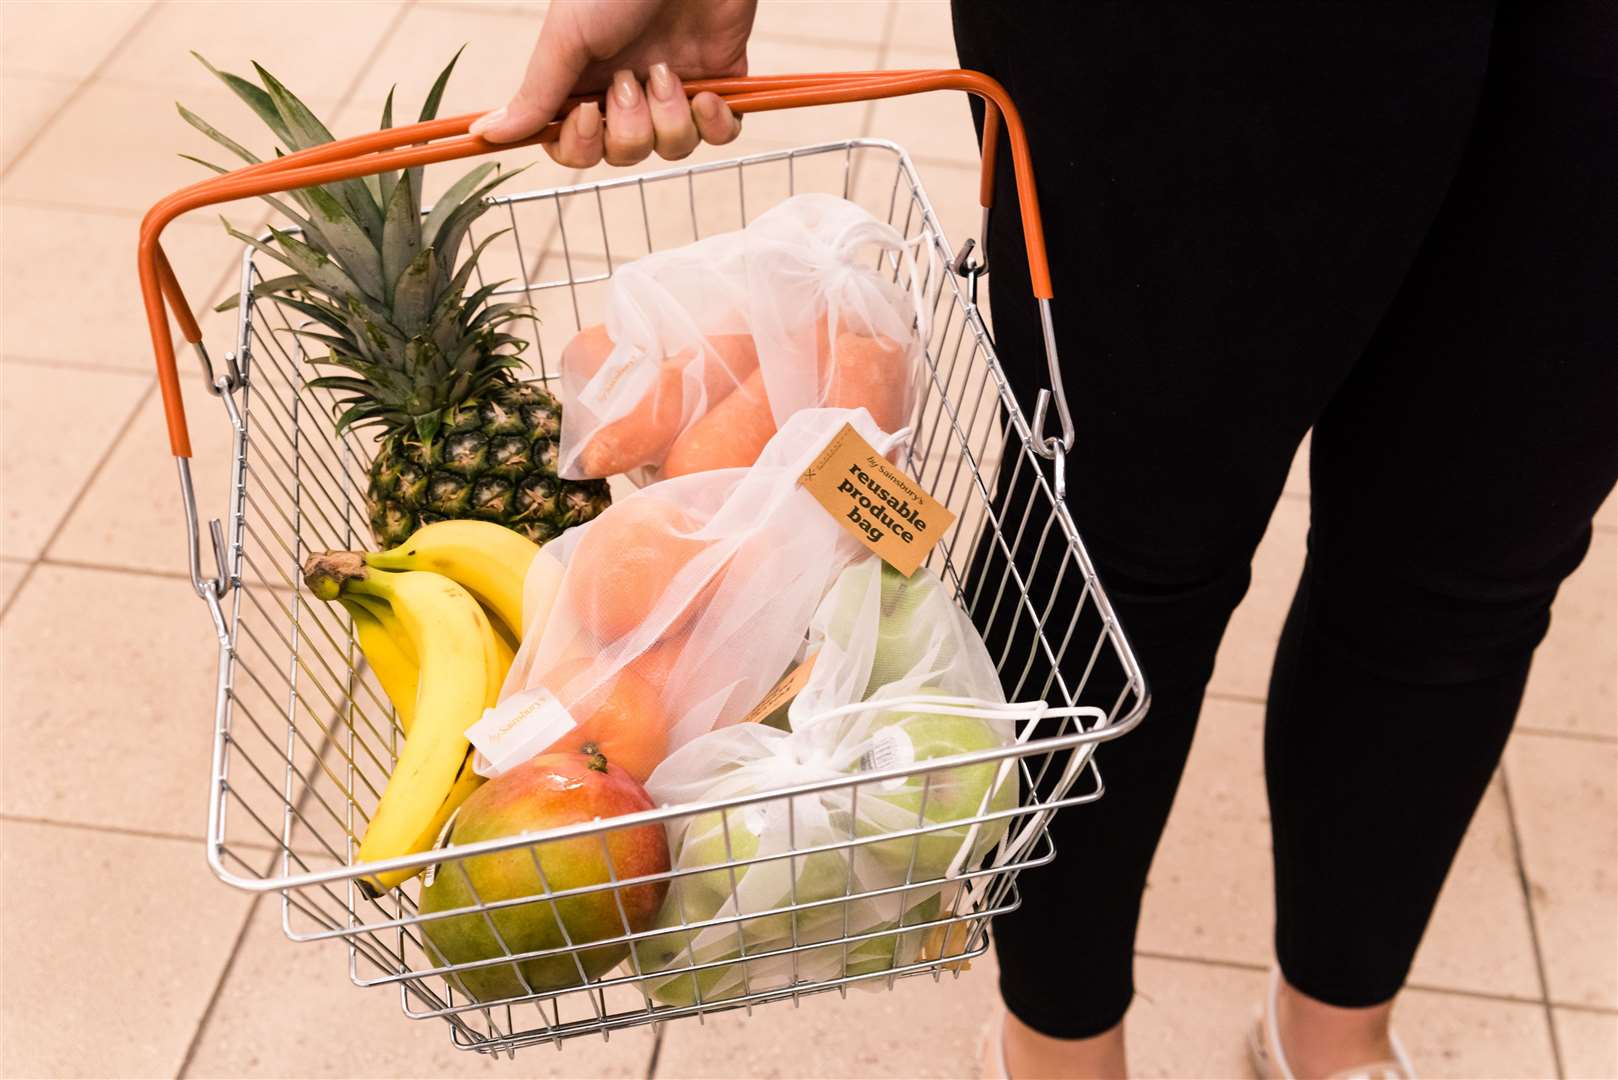 Research says customers using the coupons buy more fruit and veg portions than those which don't